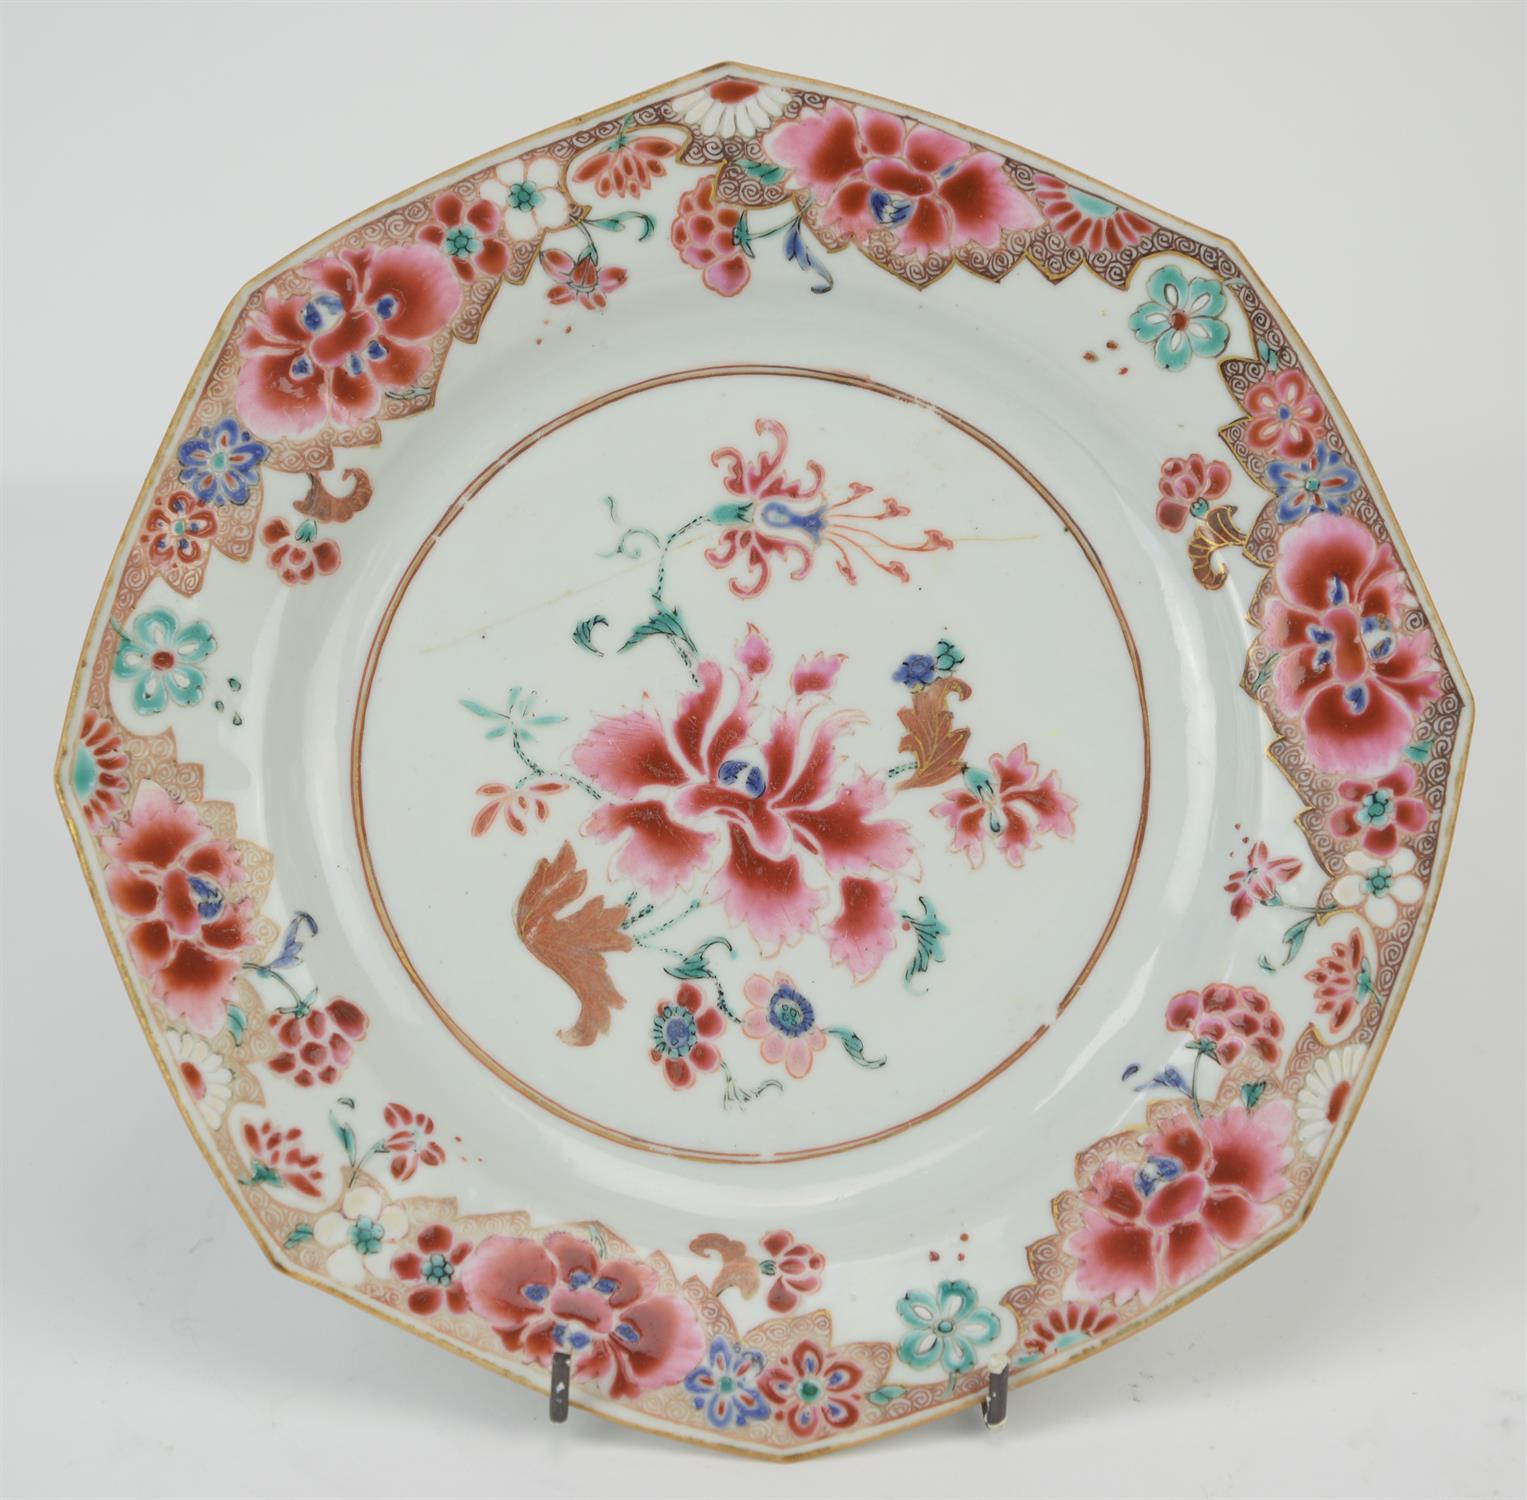 Eight famille rose dishes; each one decorated with floral designs and about 22.5 cm diameter, - Image 20 of 28